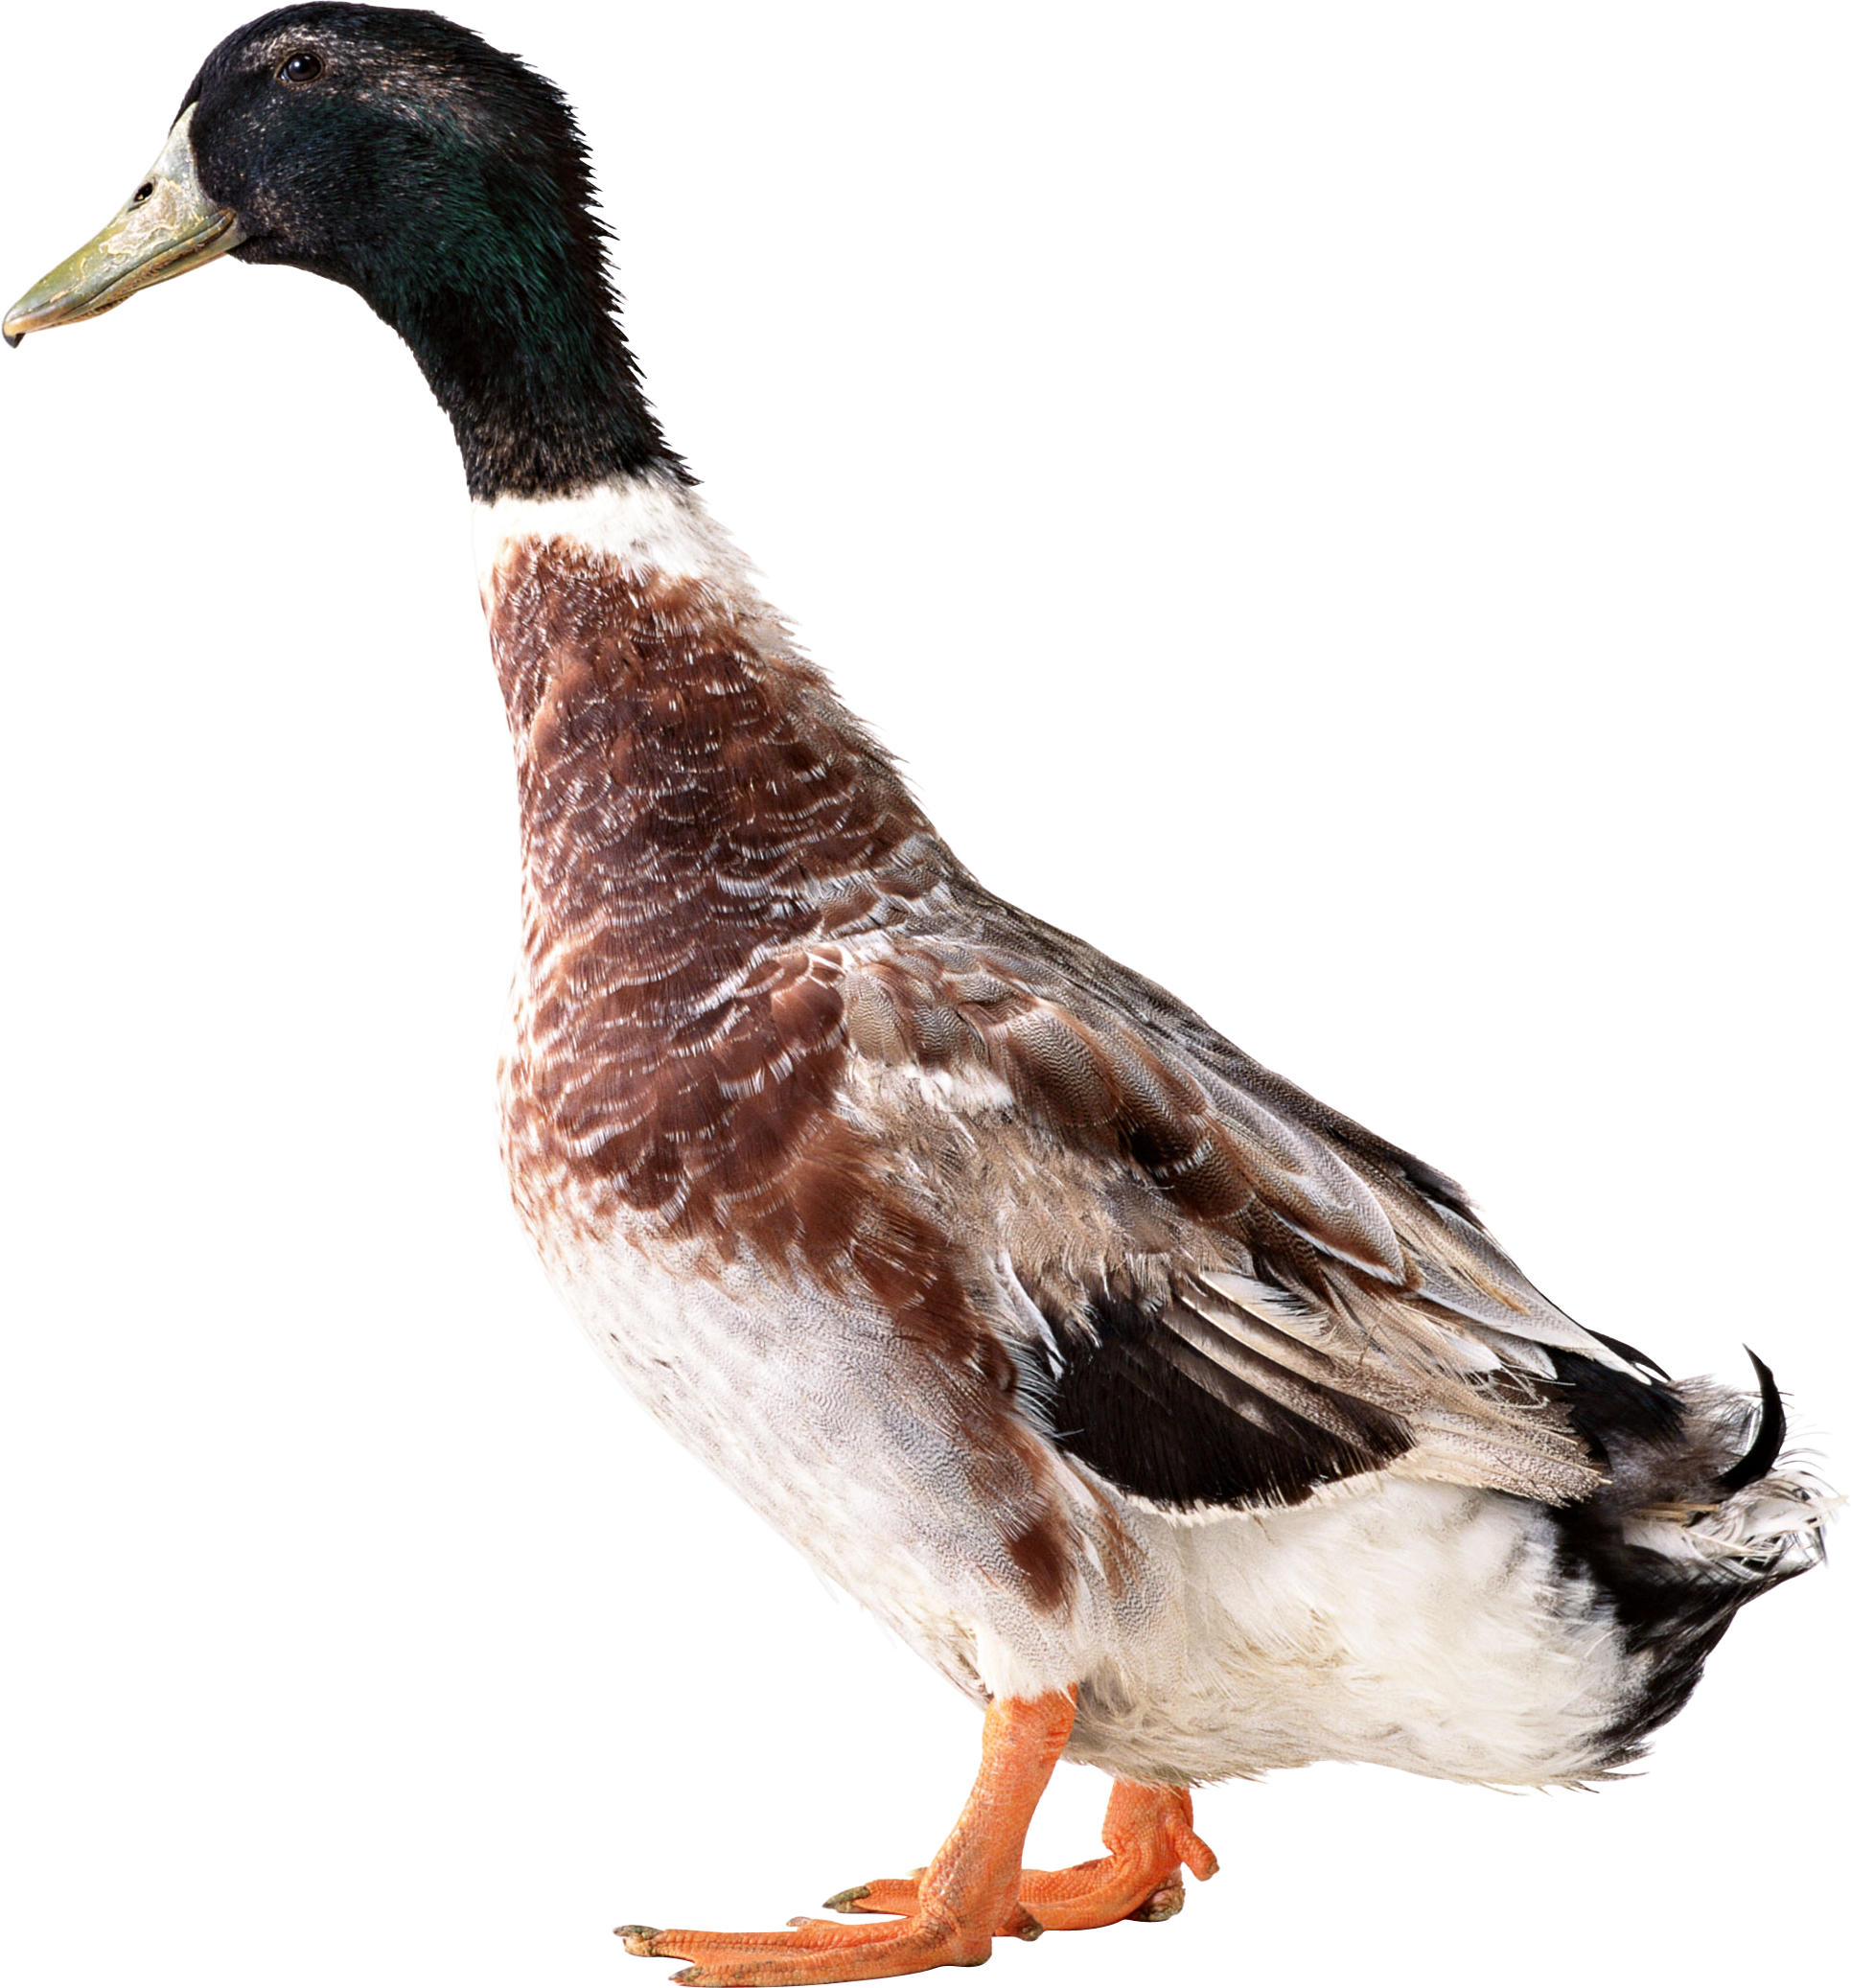 Png image free download. Ducks clipart three duck